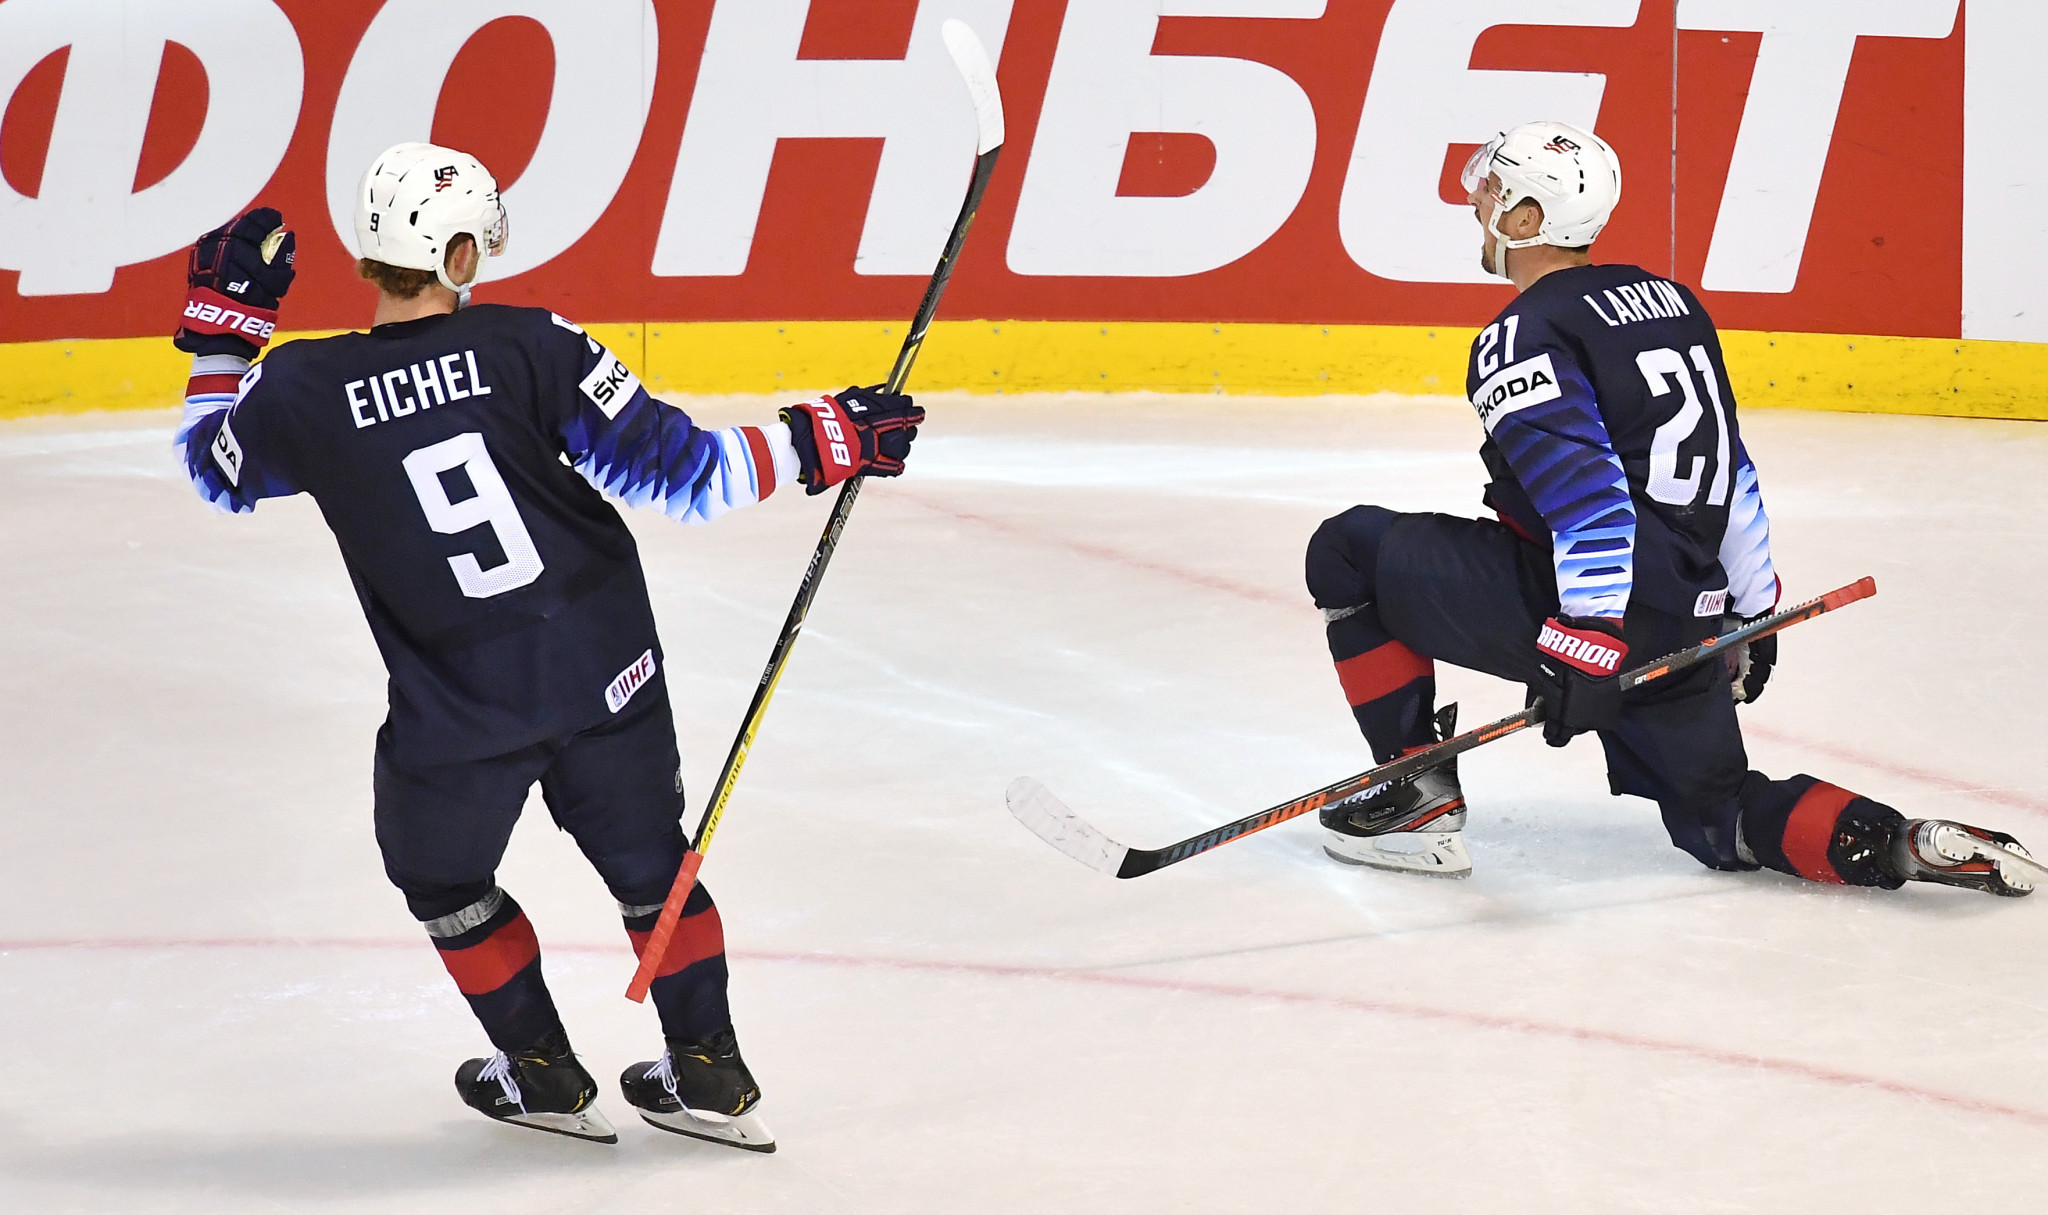 United States beat Finland in heavyweight Group A clash at IIHF World Championship